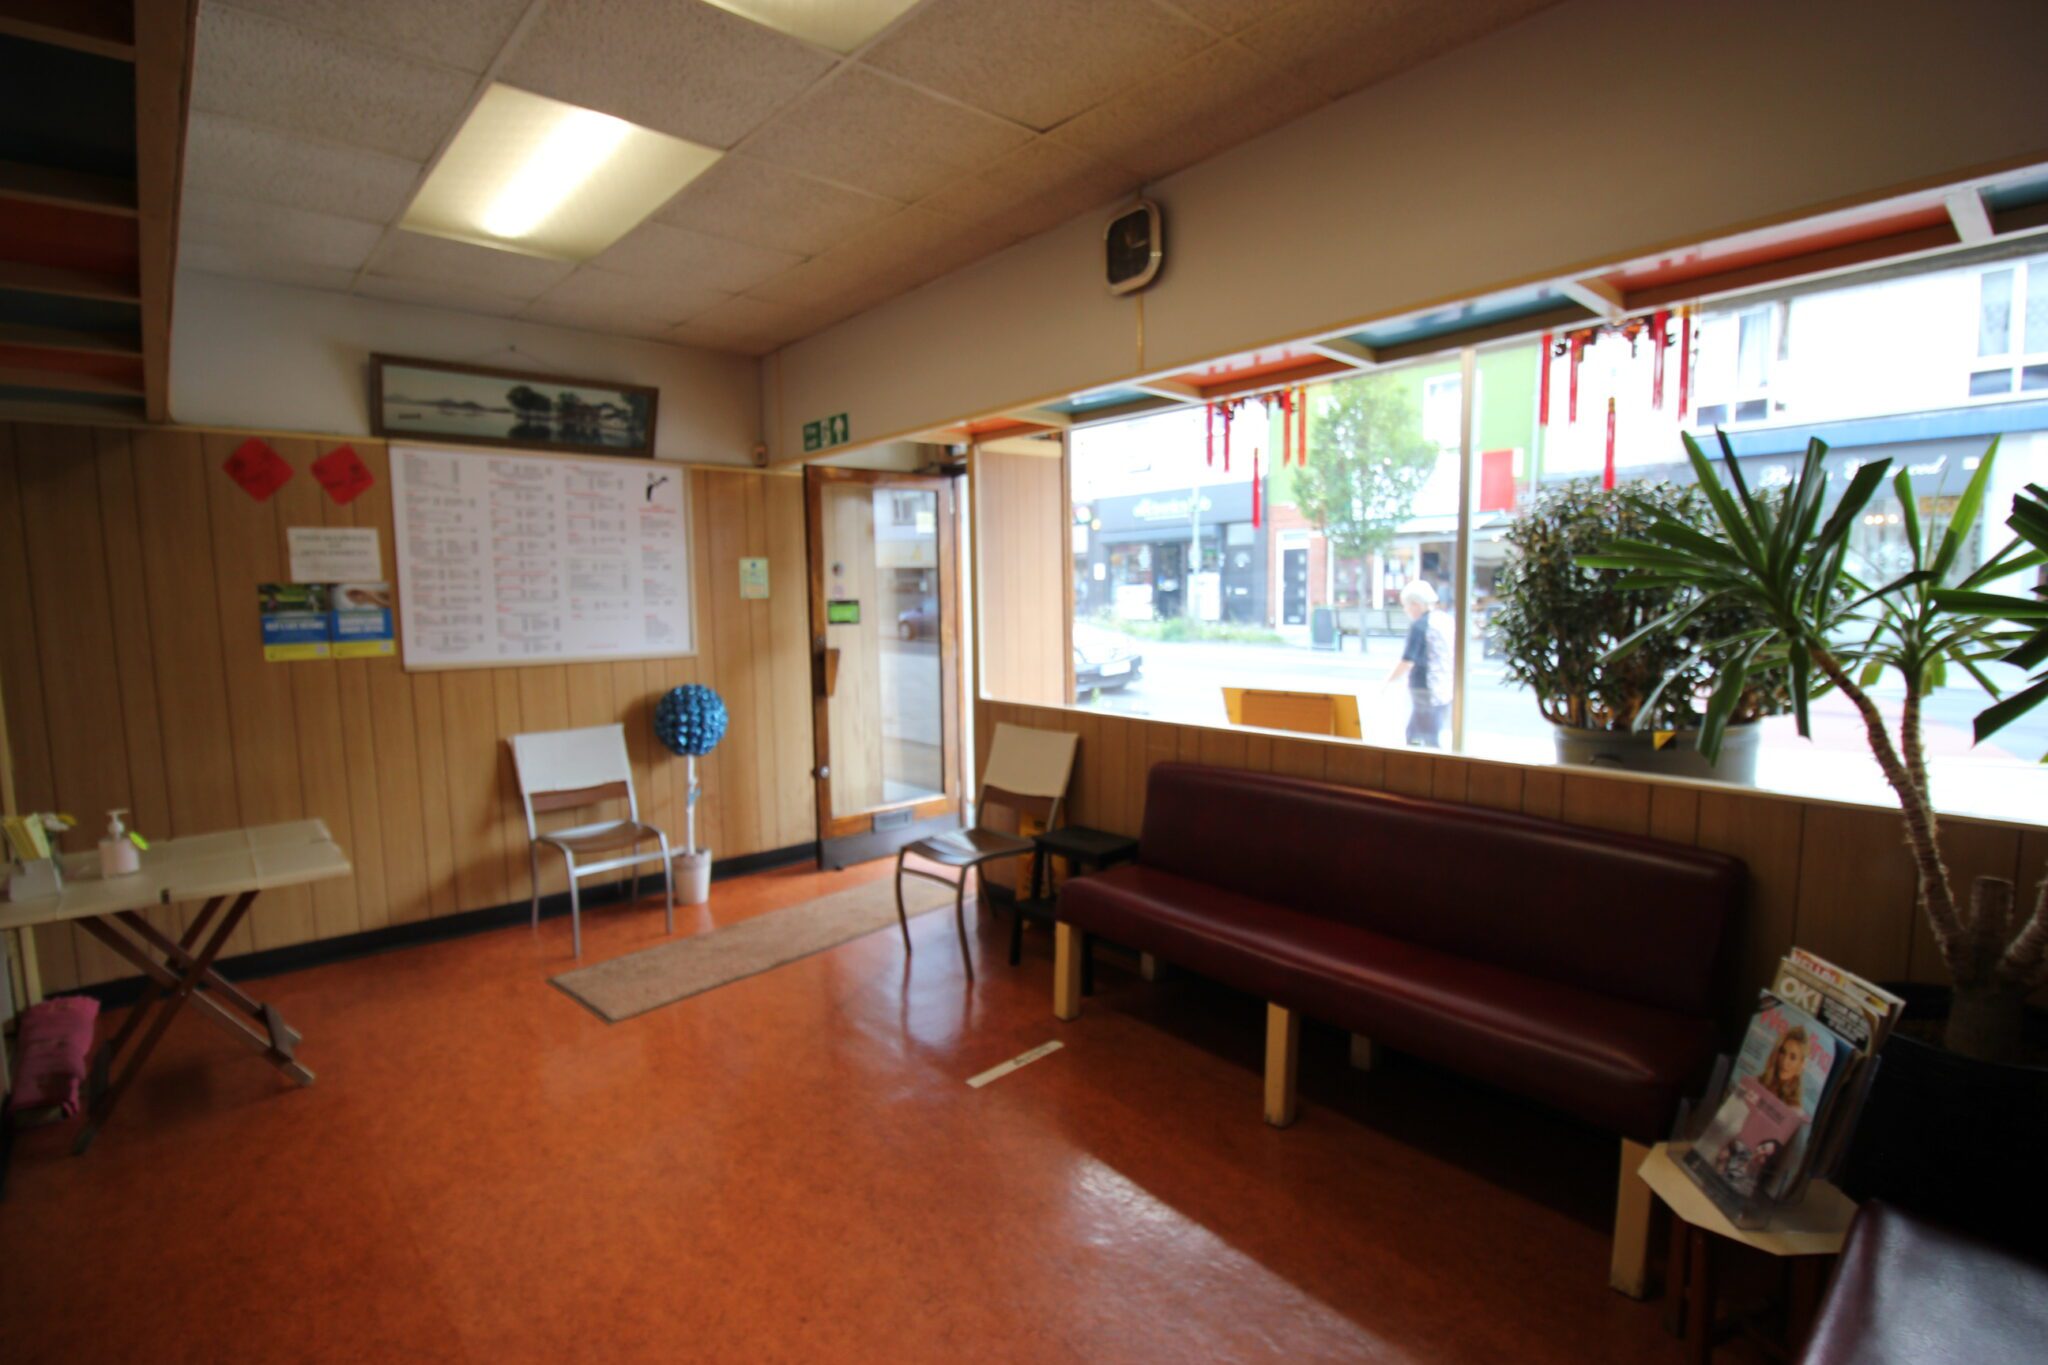 Interior of a takeaway reception counter - shop front, with money tree plant in window and seating